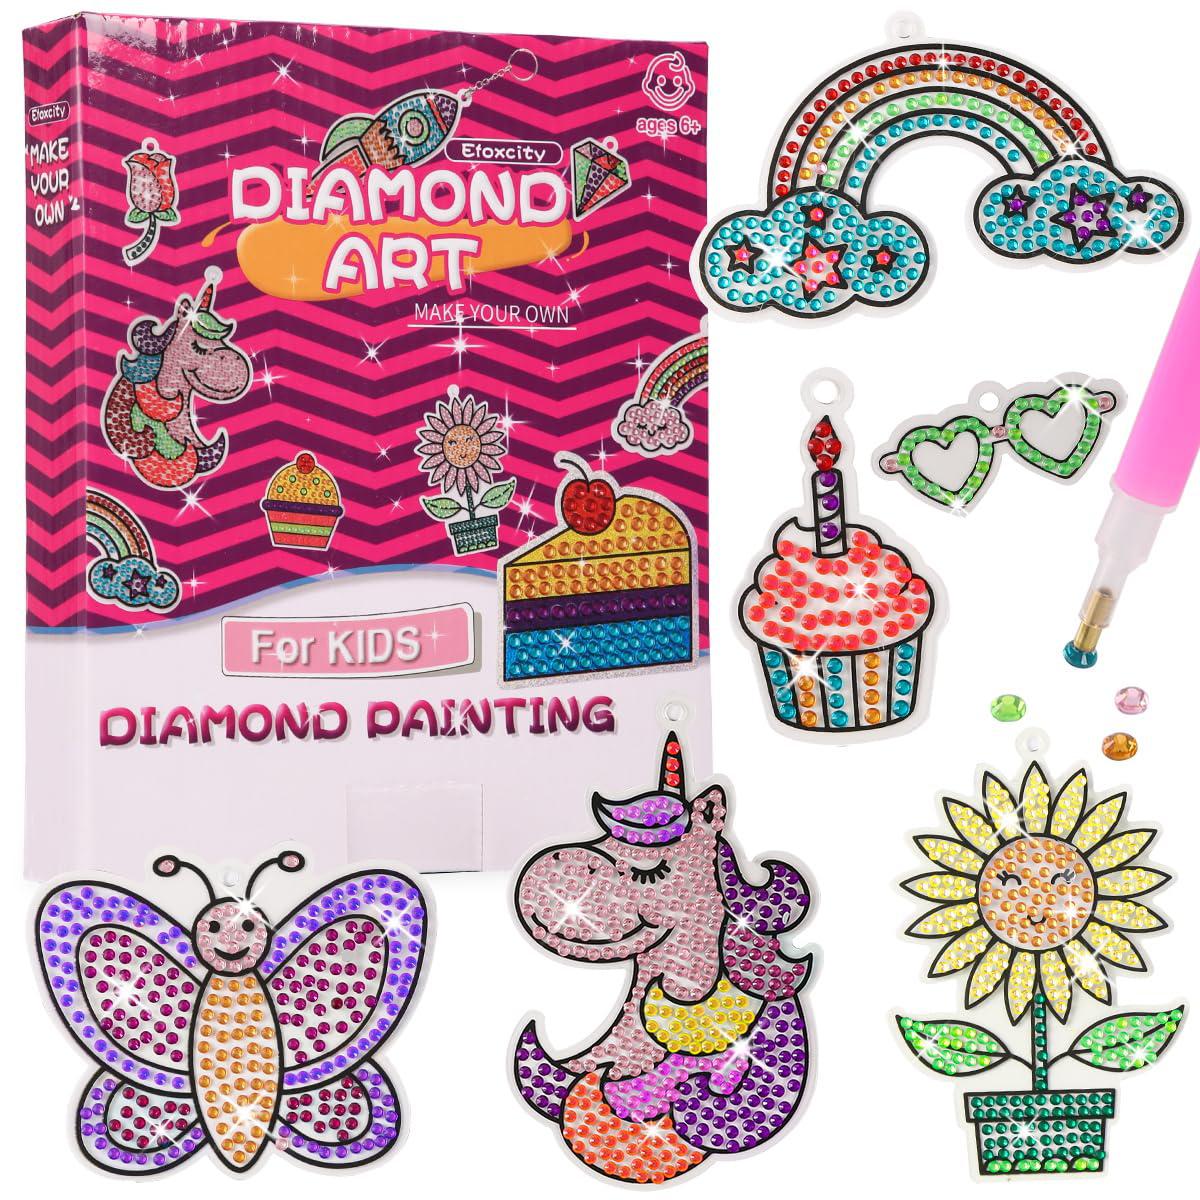 efoxcity gem arts and crafts for girls and boys, gem art kids diamond painting kit,diy birthday gifts crafts for girls boys a